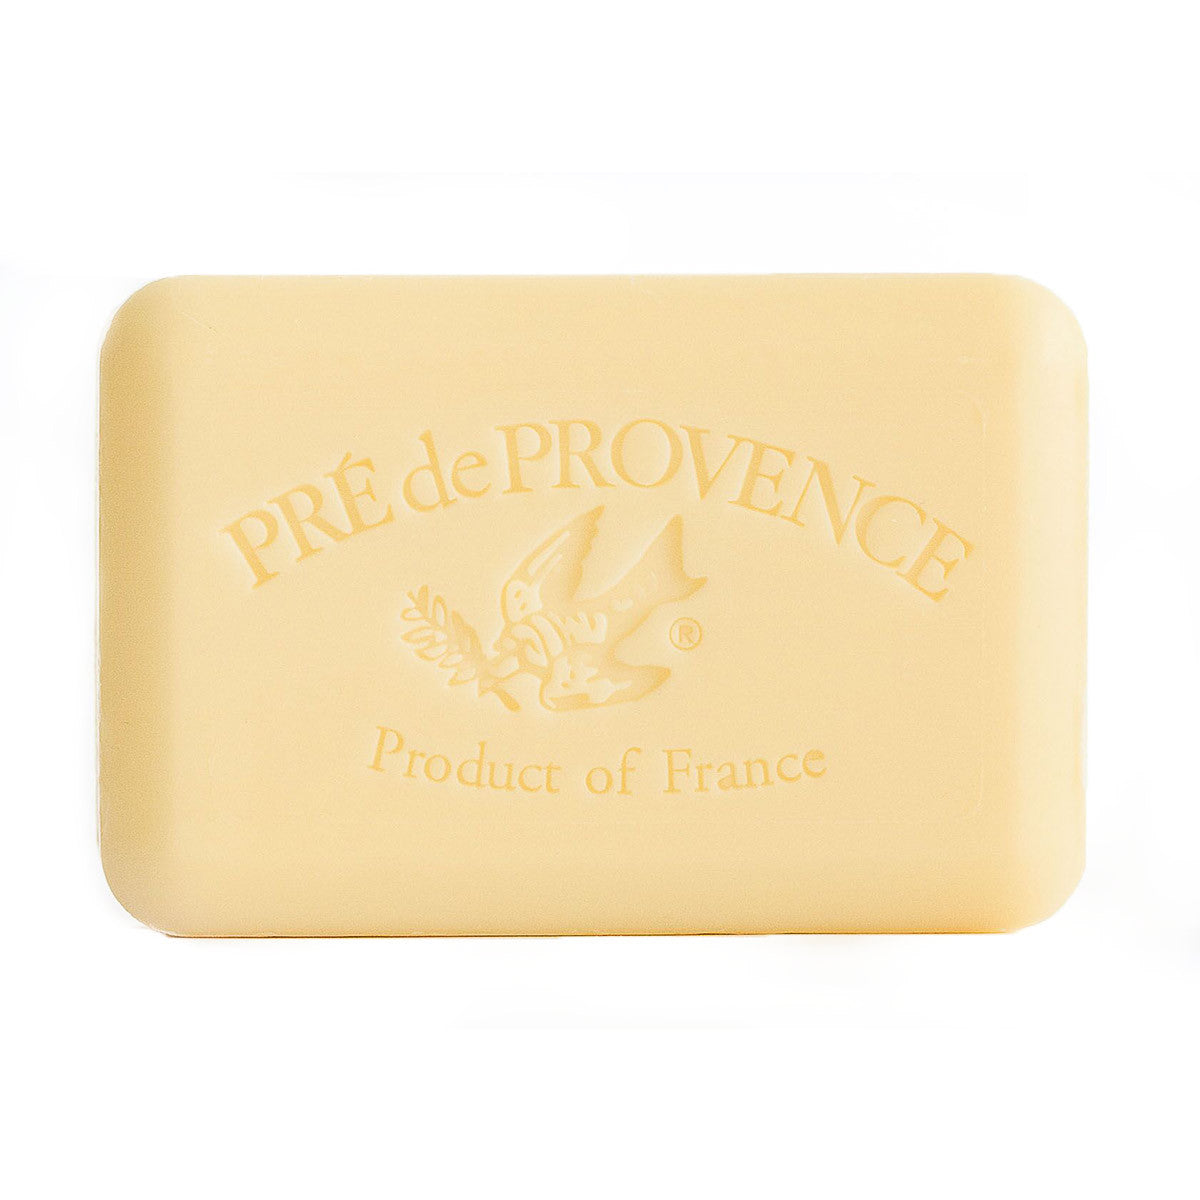 Primary image of Agrumes Soap